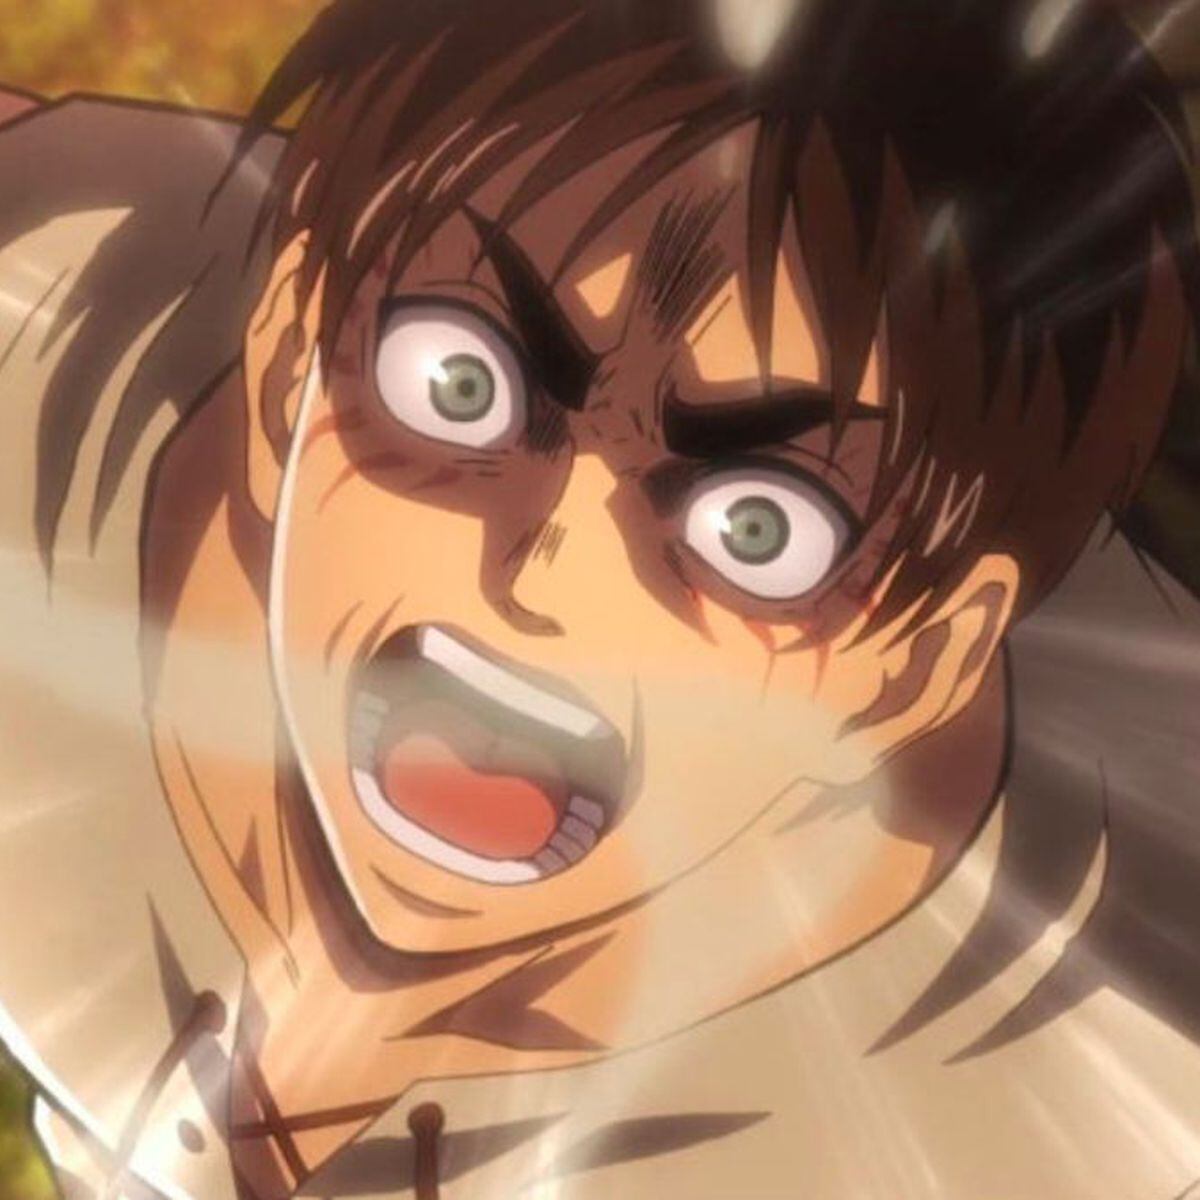 Shingeki no Kyojin Final Season Part 3 now has a release date and is  split into two more parts - Meristation